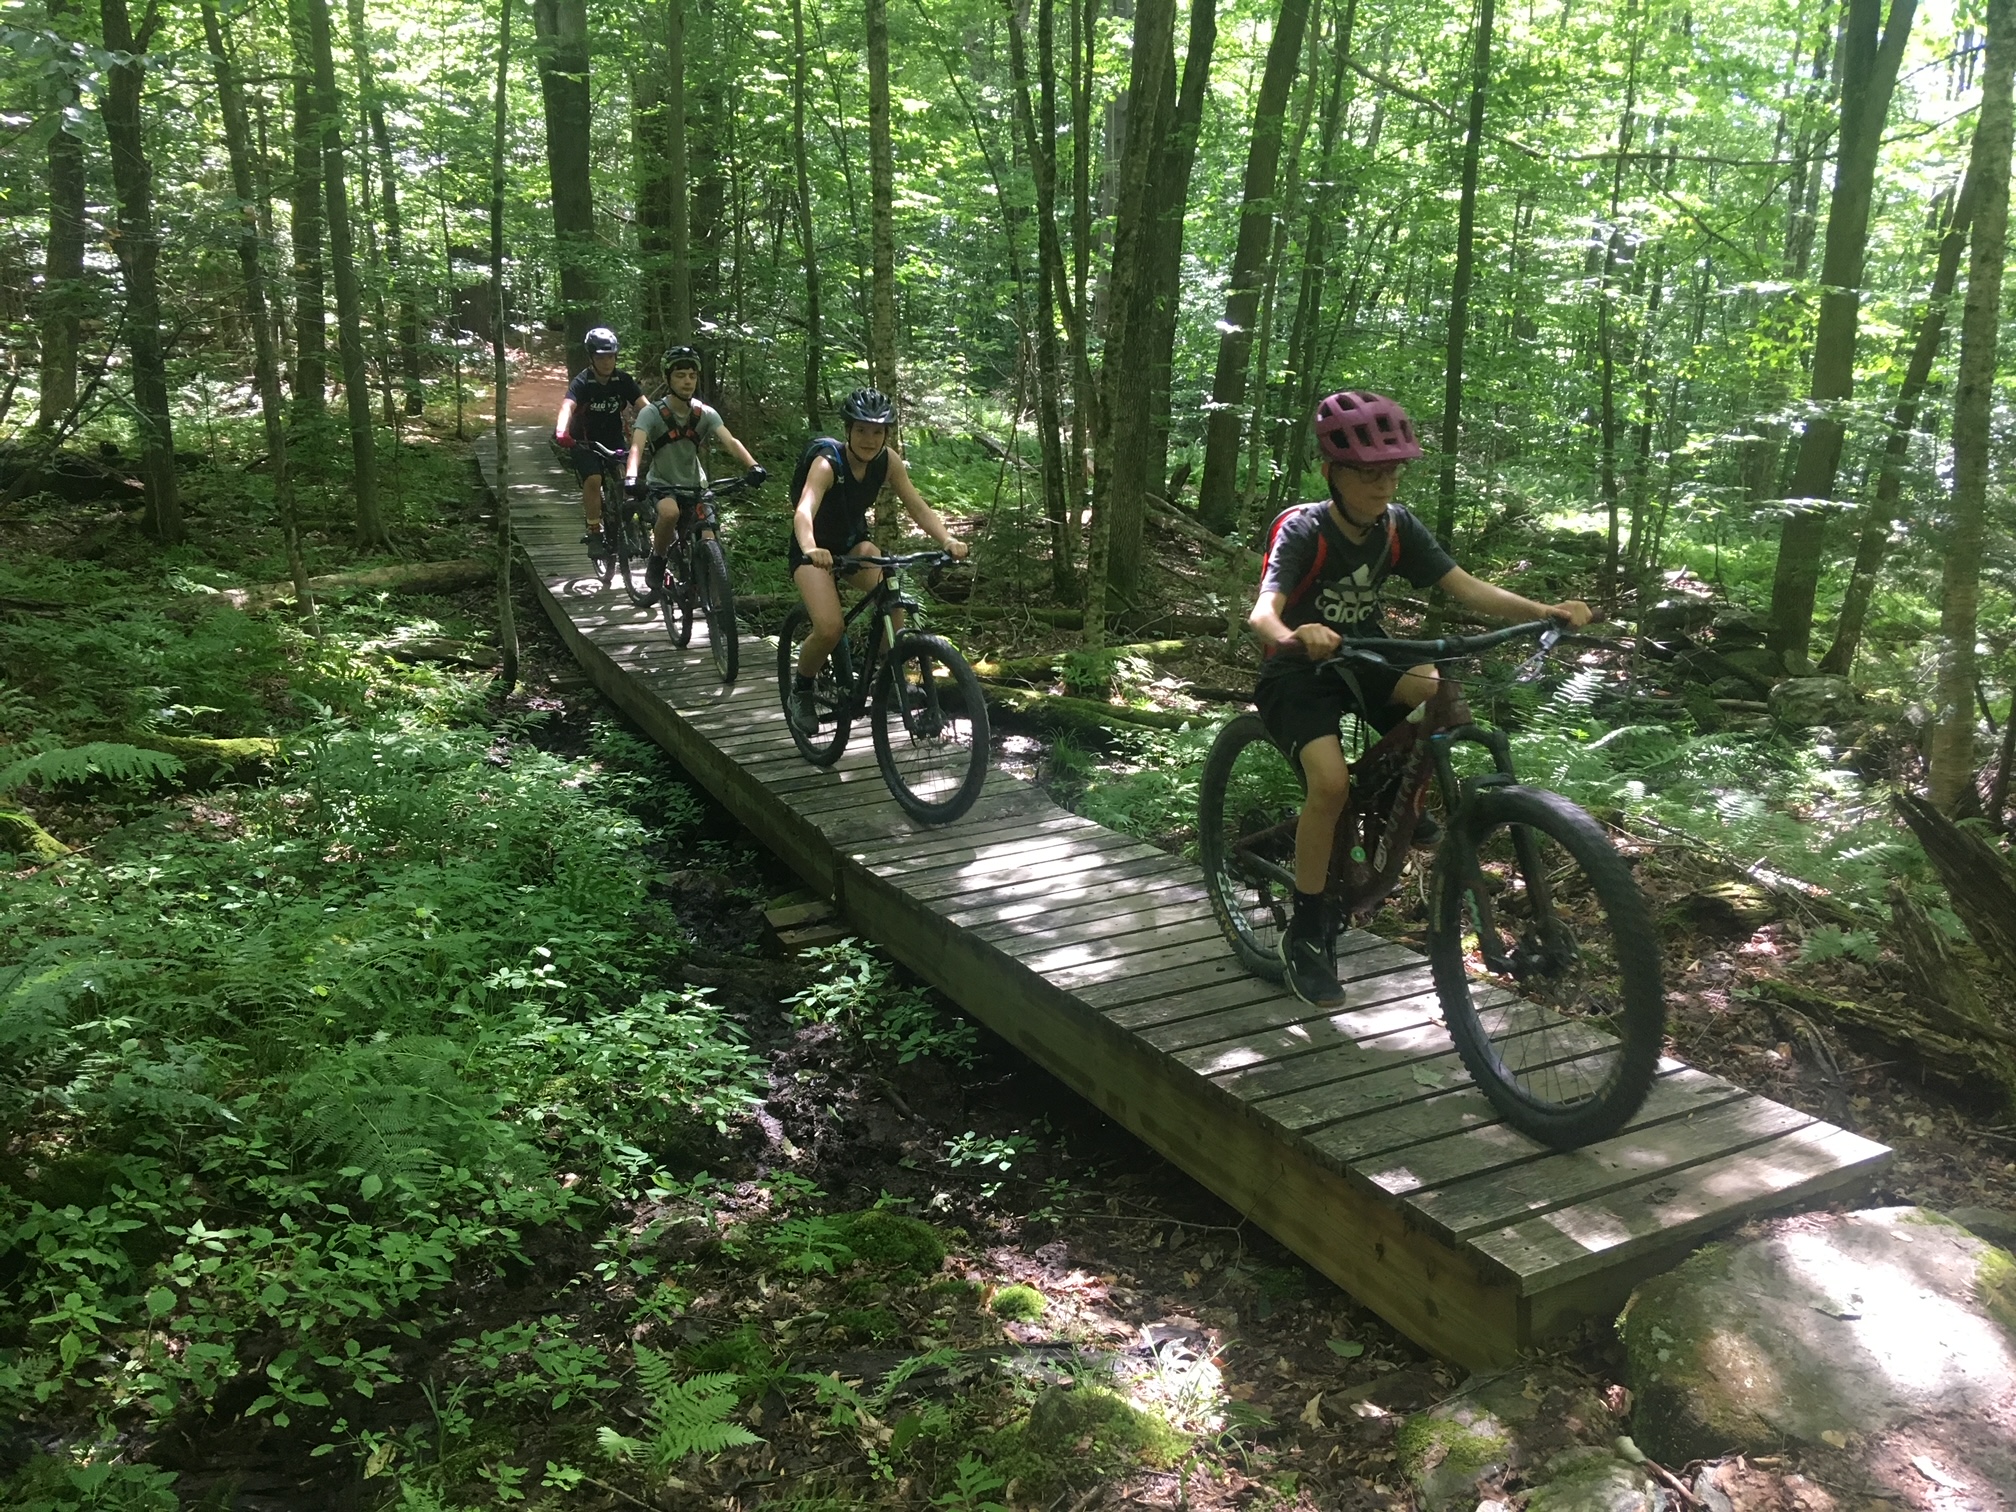 The Mud City gang charges through the woods! Here's a picture of the kids riding through the woods at Trapp Family Lodge.